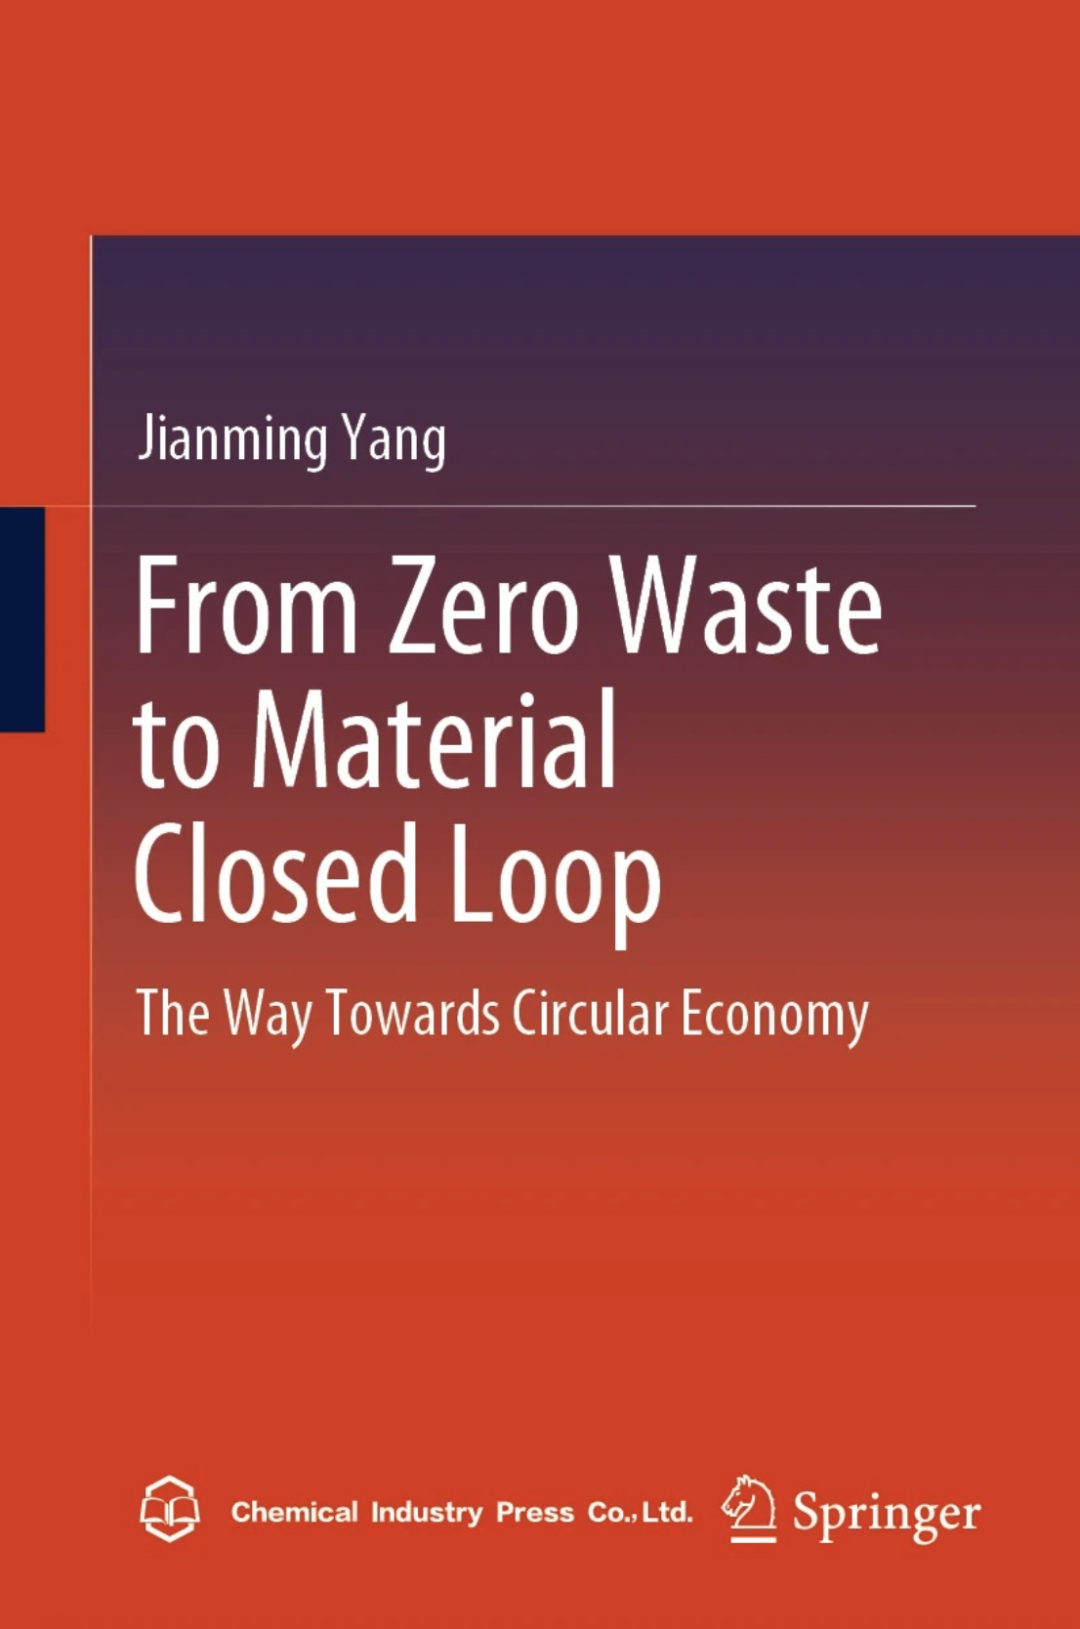 From Zero Waste to Material Closed Loop, The Way Towards Circular Economy